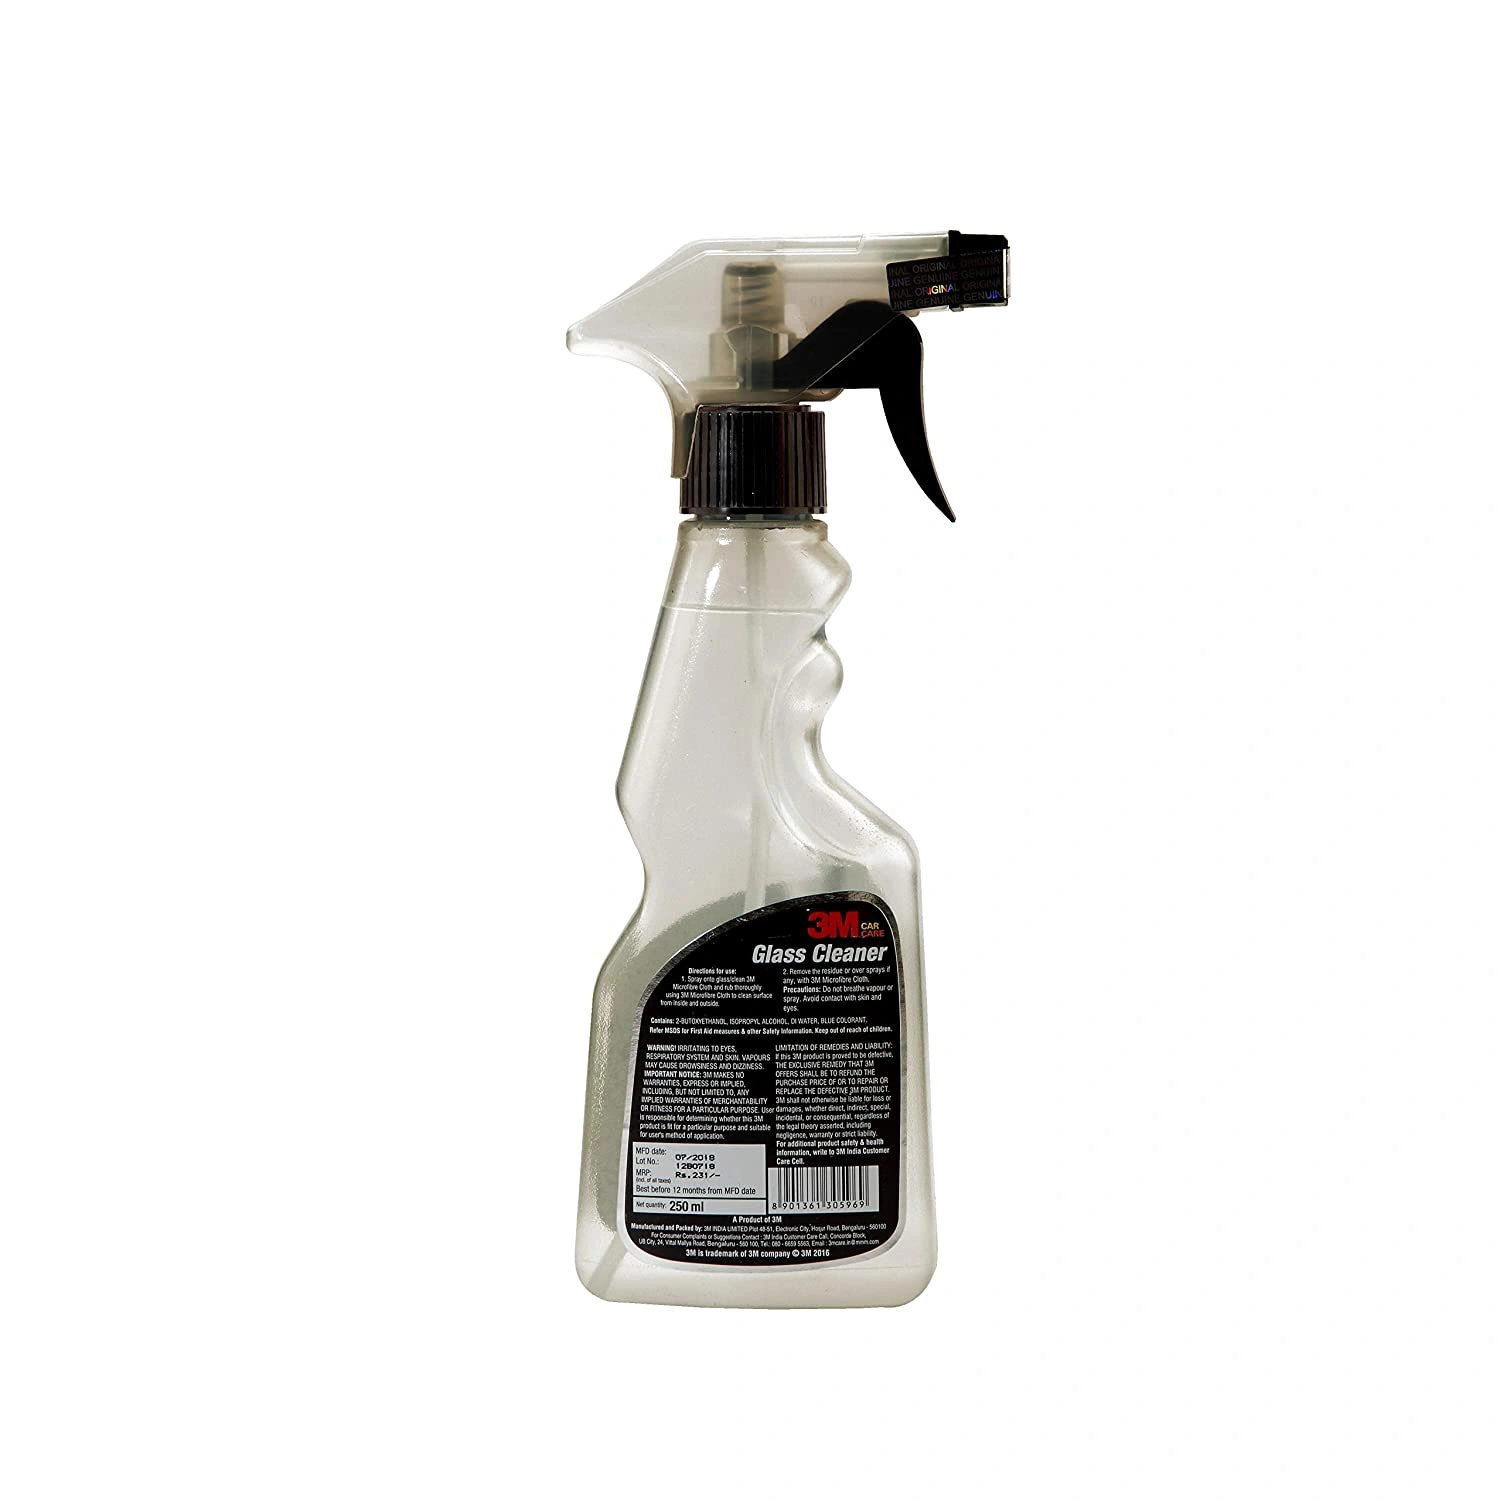 3M Auto Specialty Glass Cleaner-250 ml-1